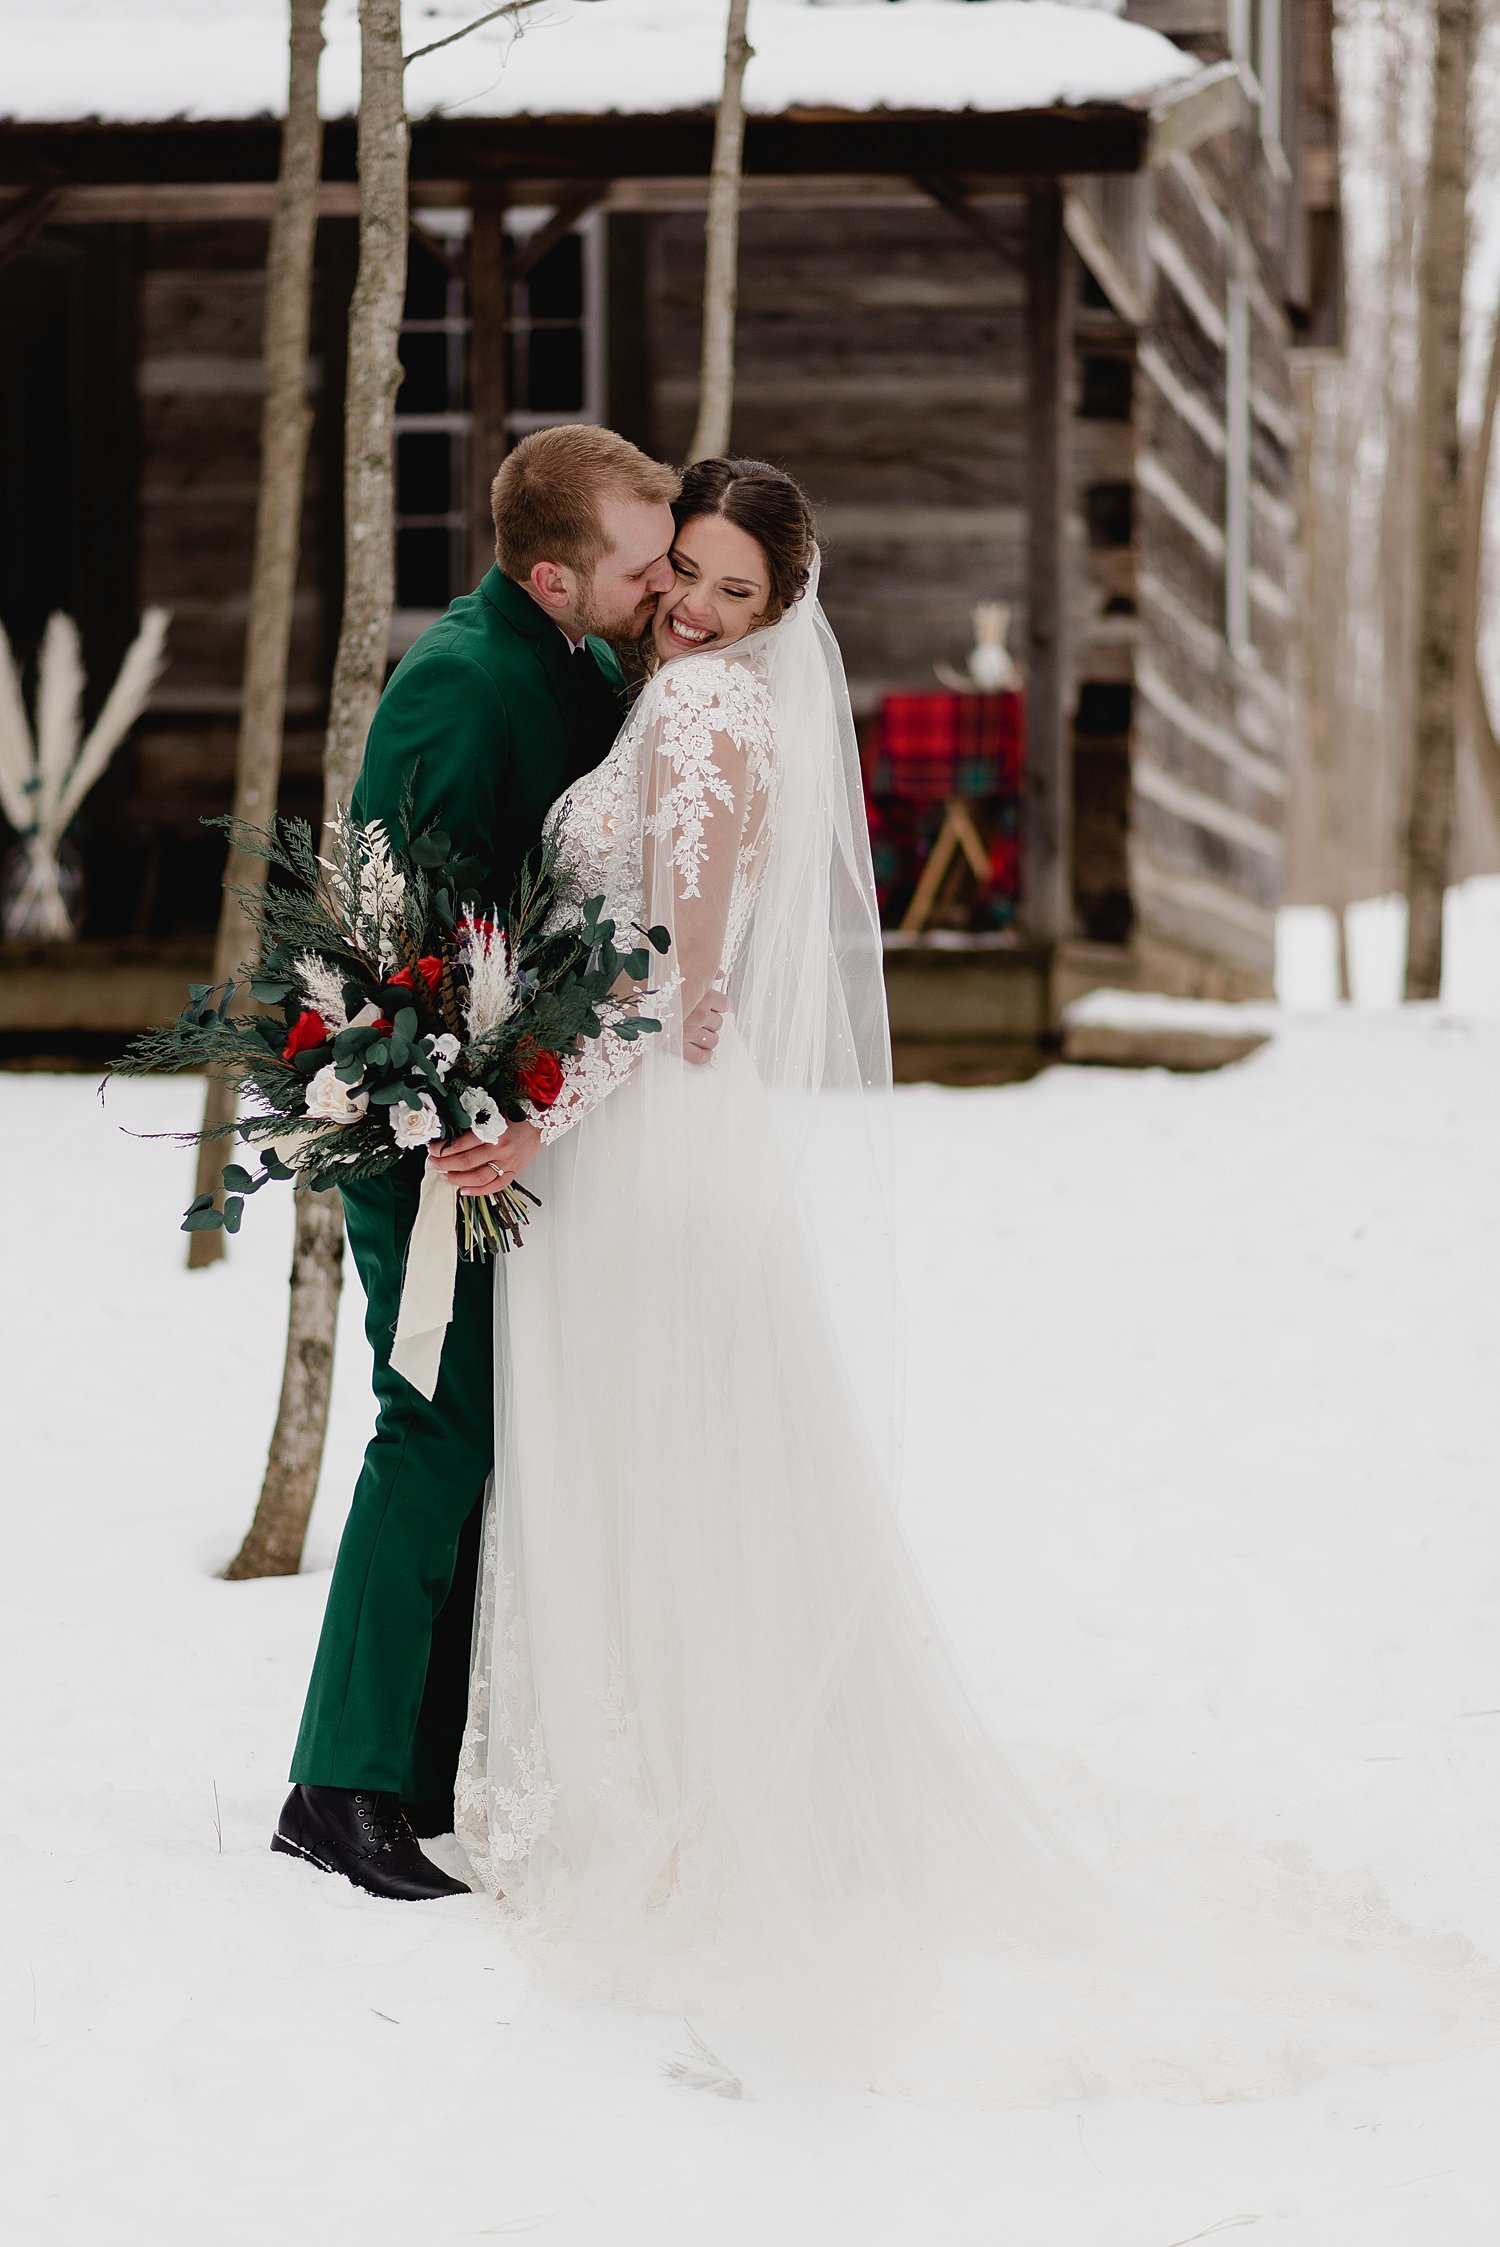 Intimate Winter Elopement at O'Hara Mill Homestead in Madoc, Ontario | Prince Edward County Wedding Photographer | Holly McMurter Photographs_0042.jpg